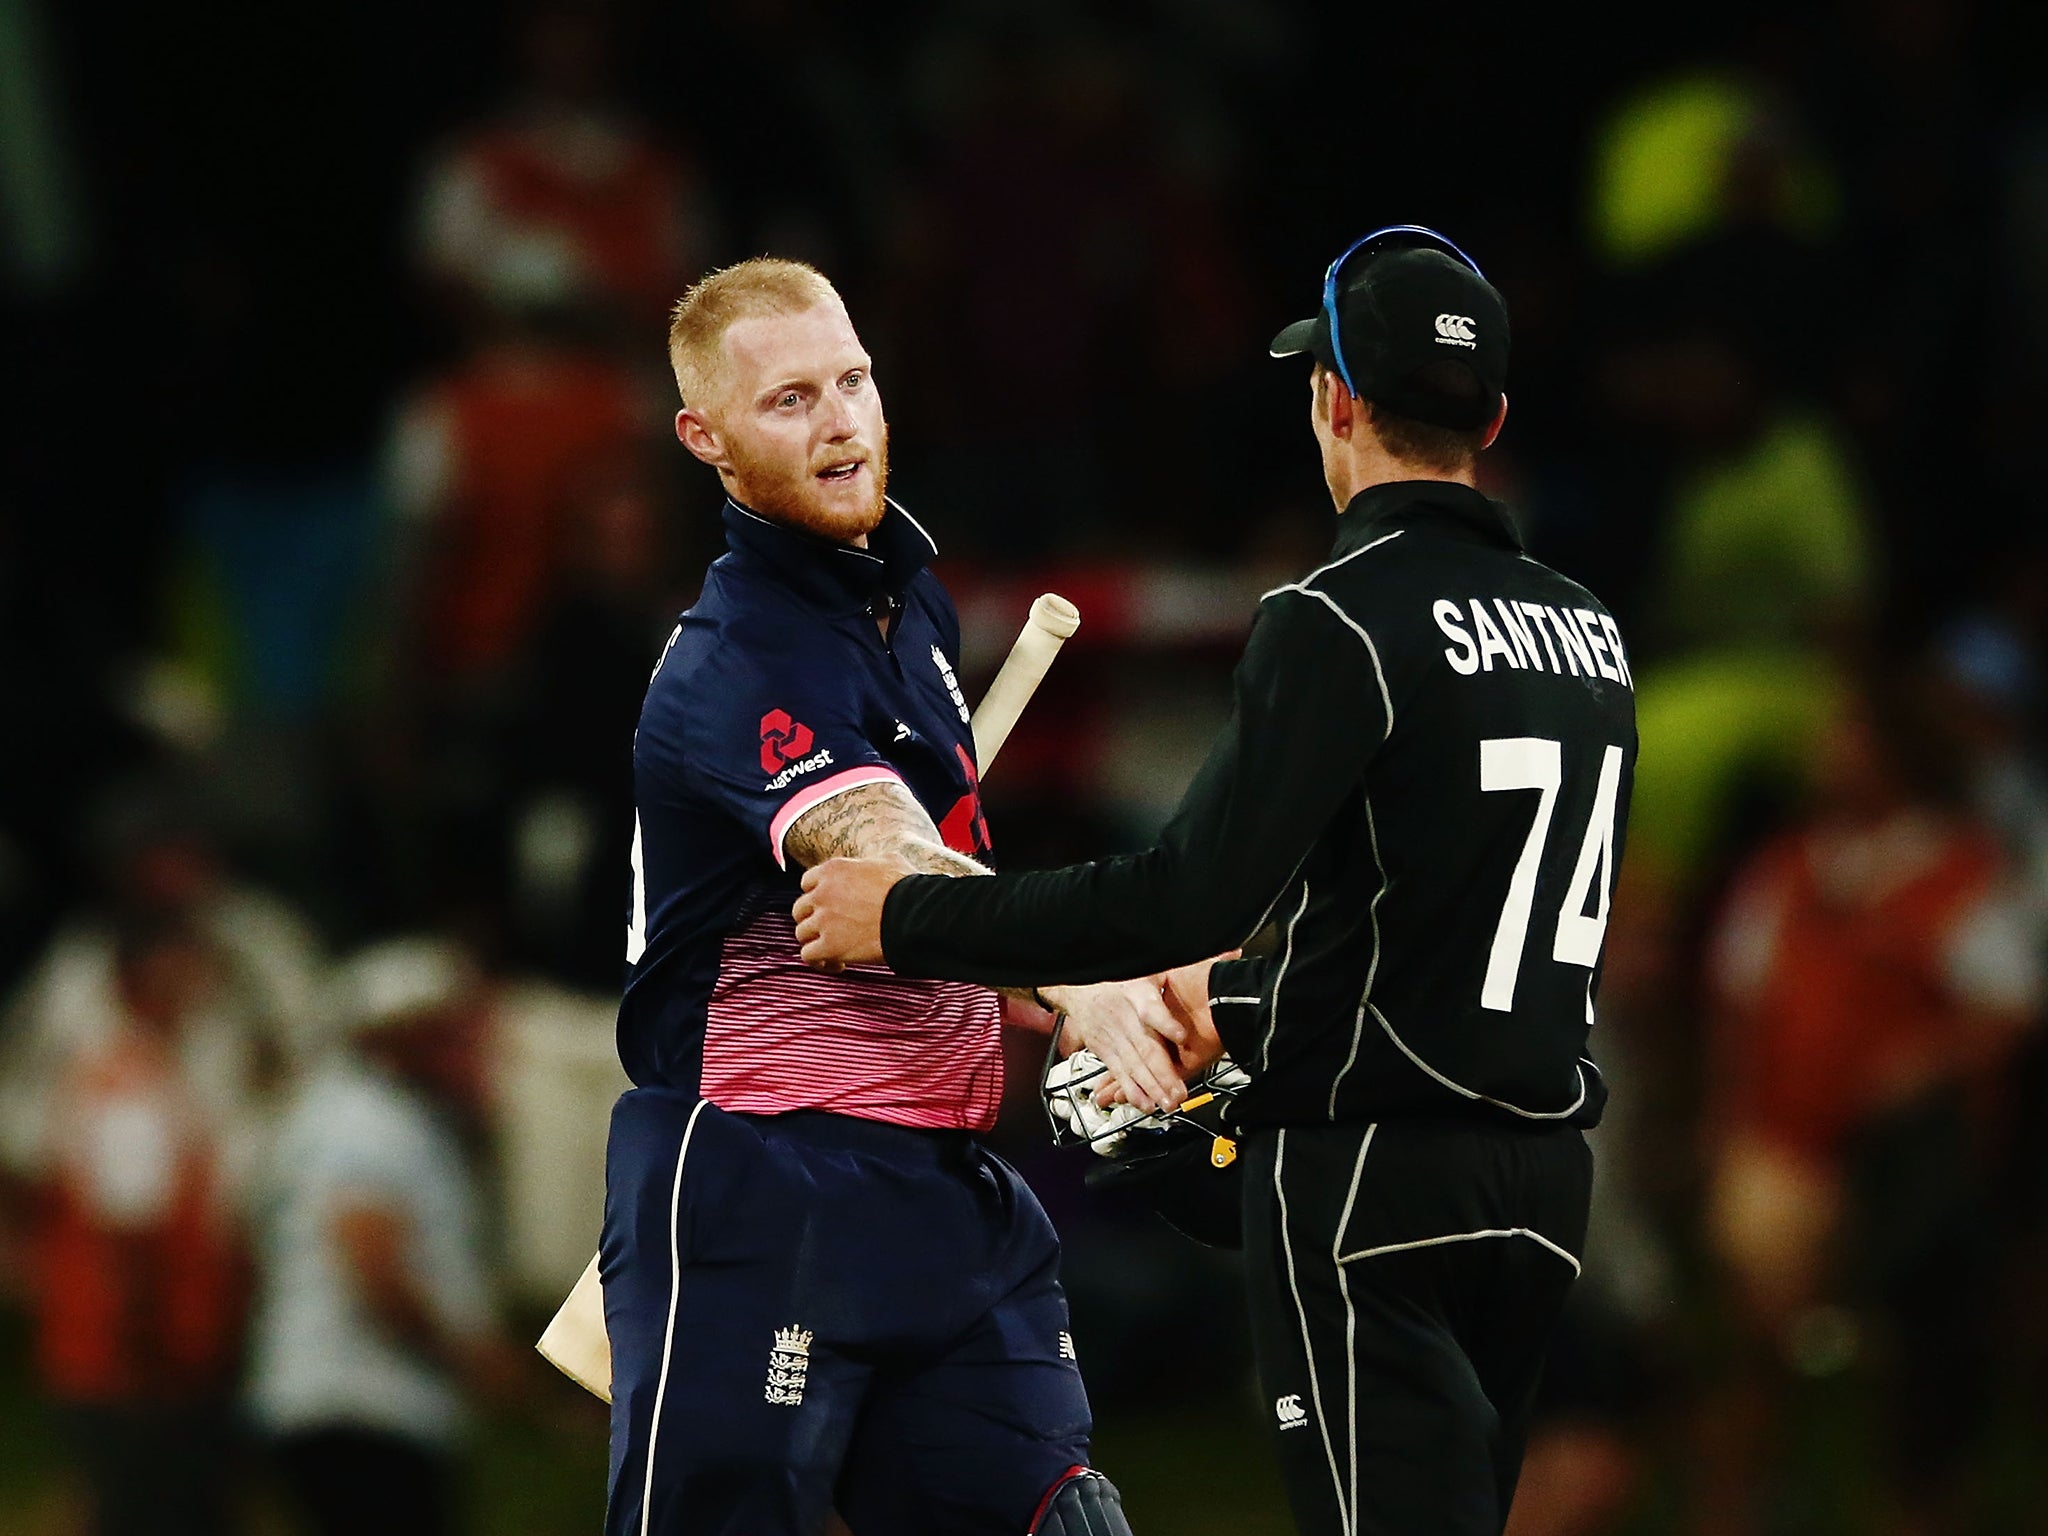 Stokes guided England to victory to level the series